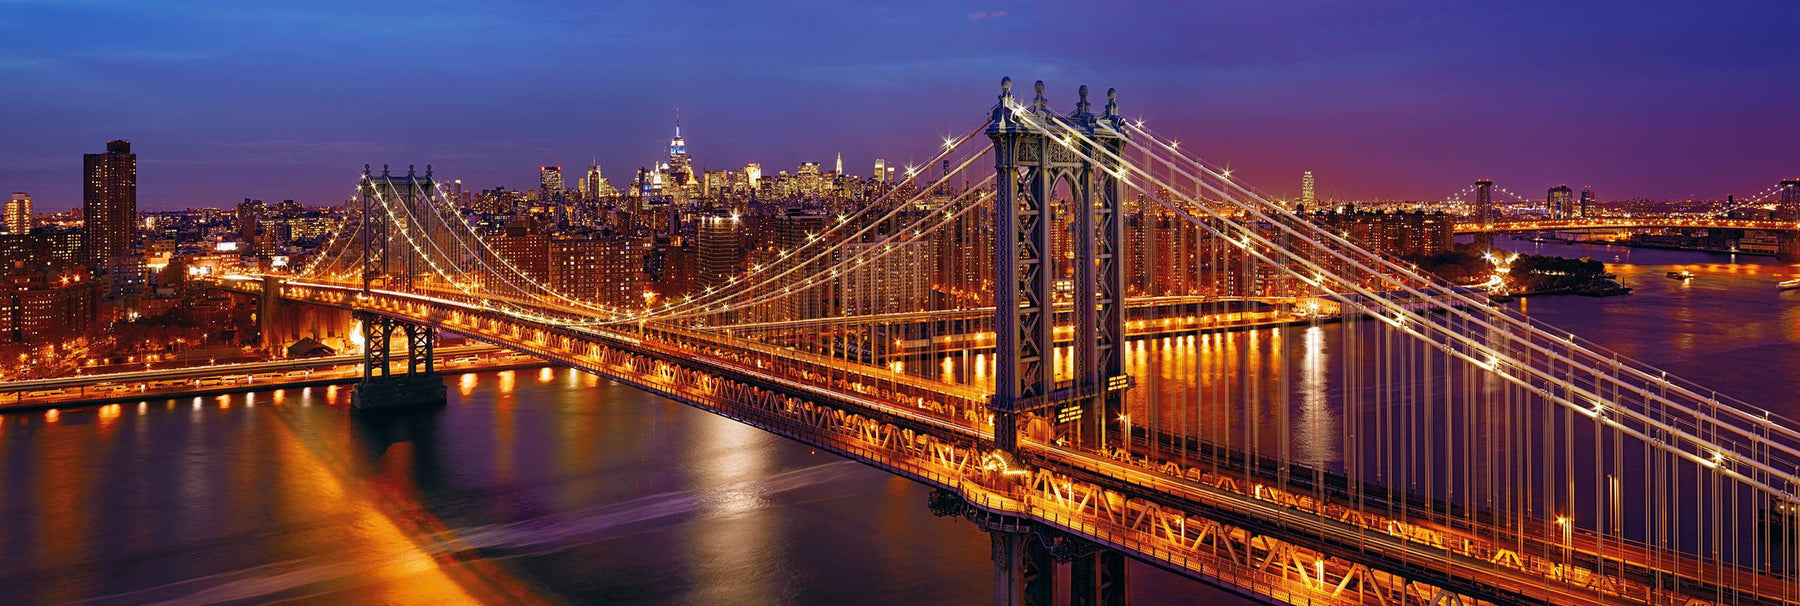 Manhattan Bridge lit up at night overlooking the glow of New York City in the distance